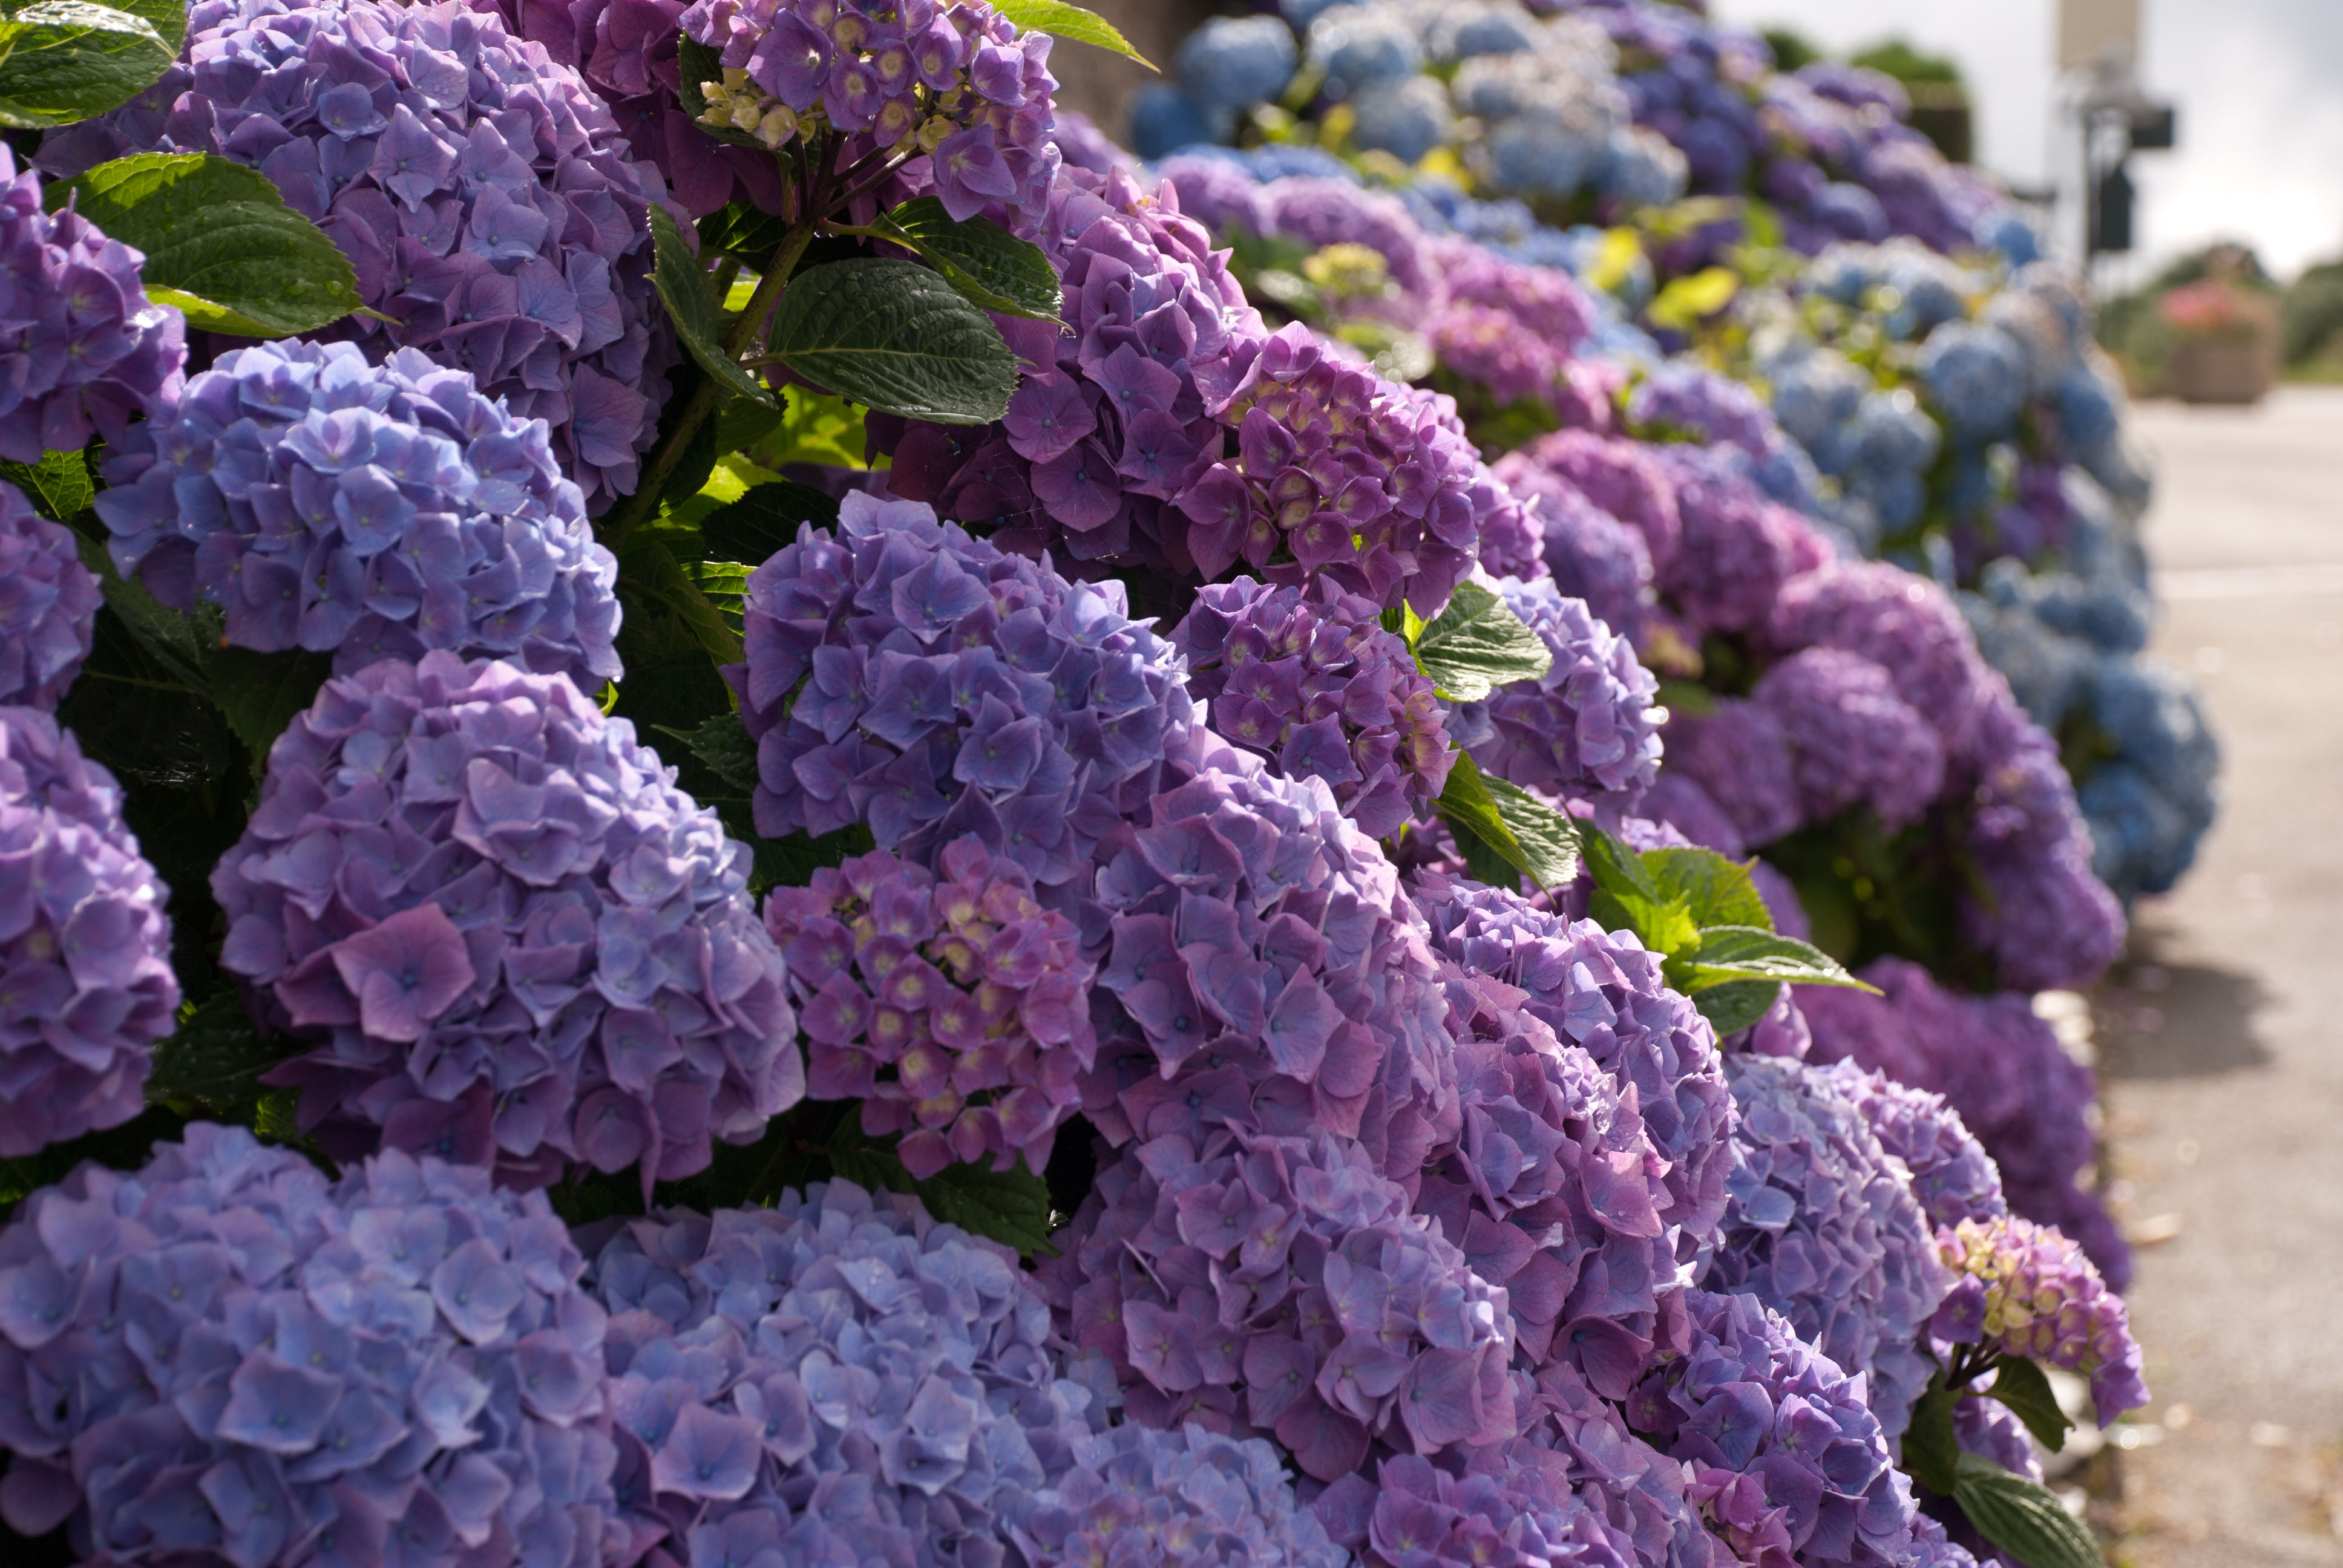  common types of hydrangea, it has a mophead of individual flowers